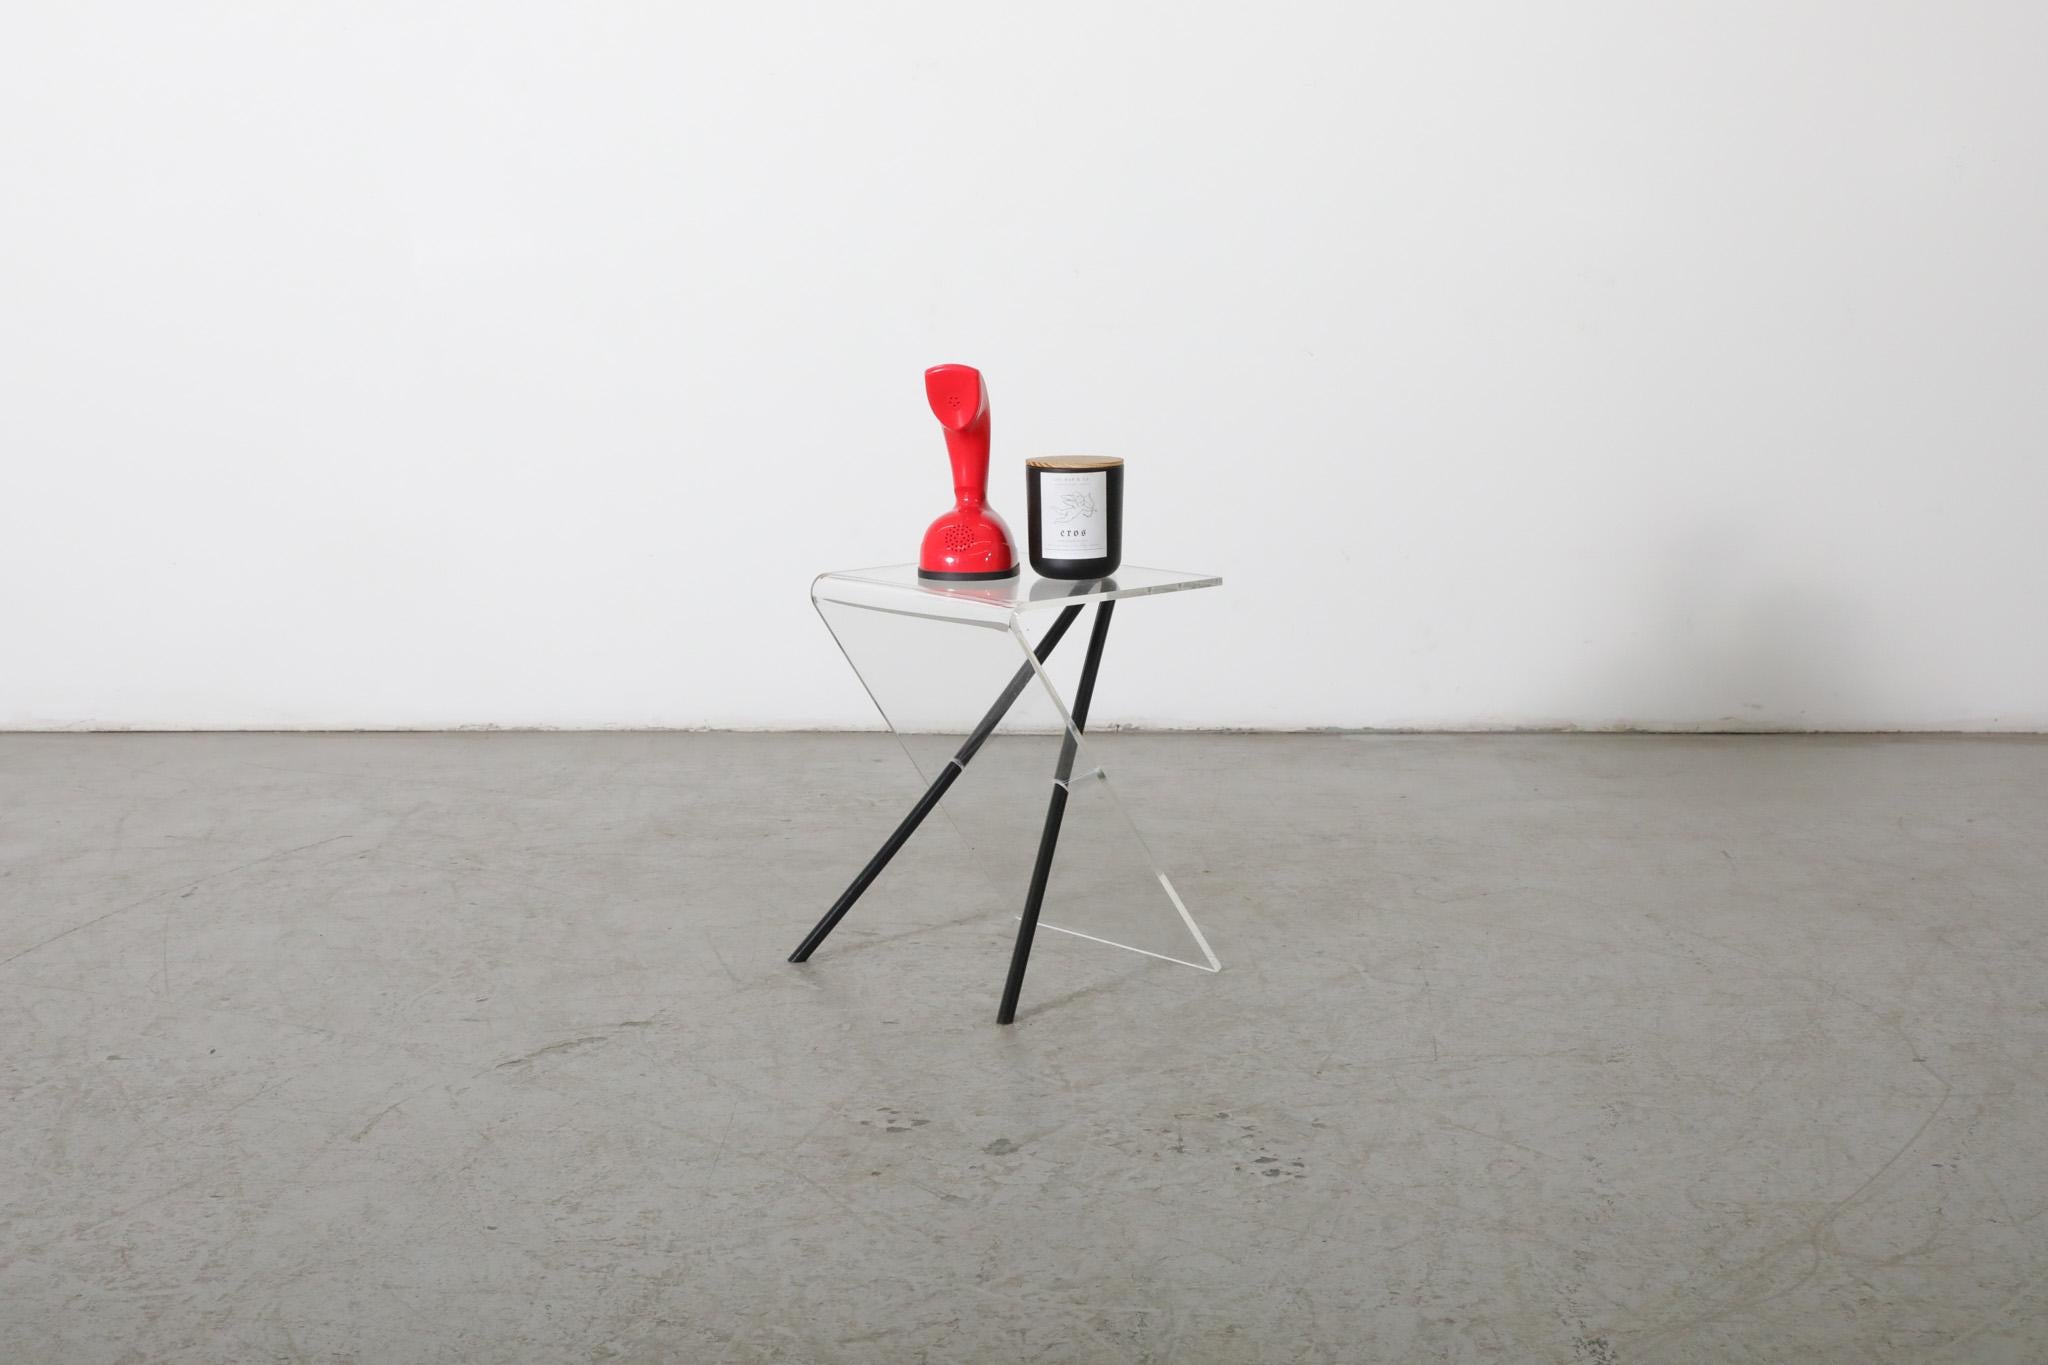 MOD, Ettore Sottsass inspired clear acrylic side table with black legs. A minimalistic and sleek mix of materials crafted into an attractive, unconventional side table. In original condition with wear and scratching consistent with age and use.